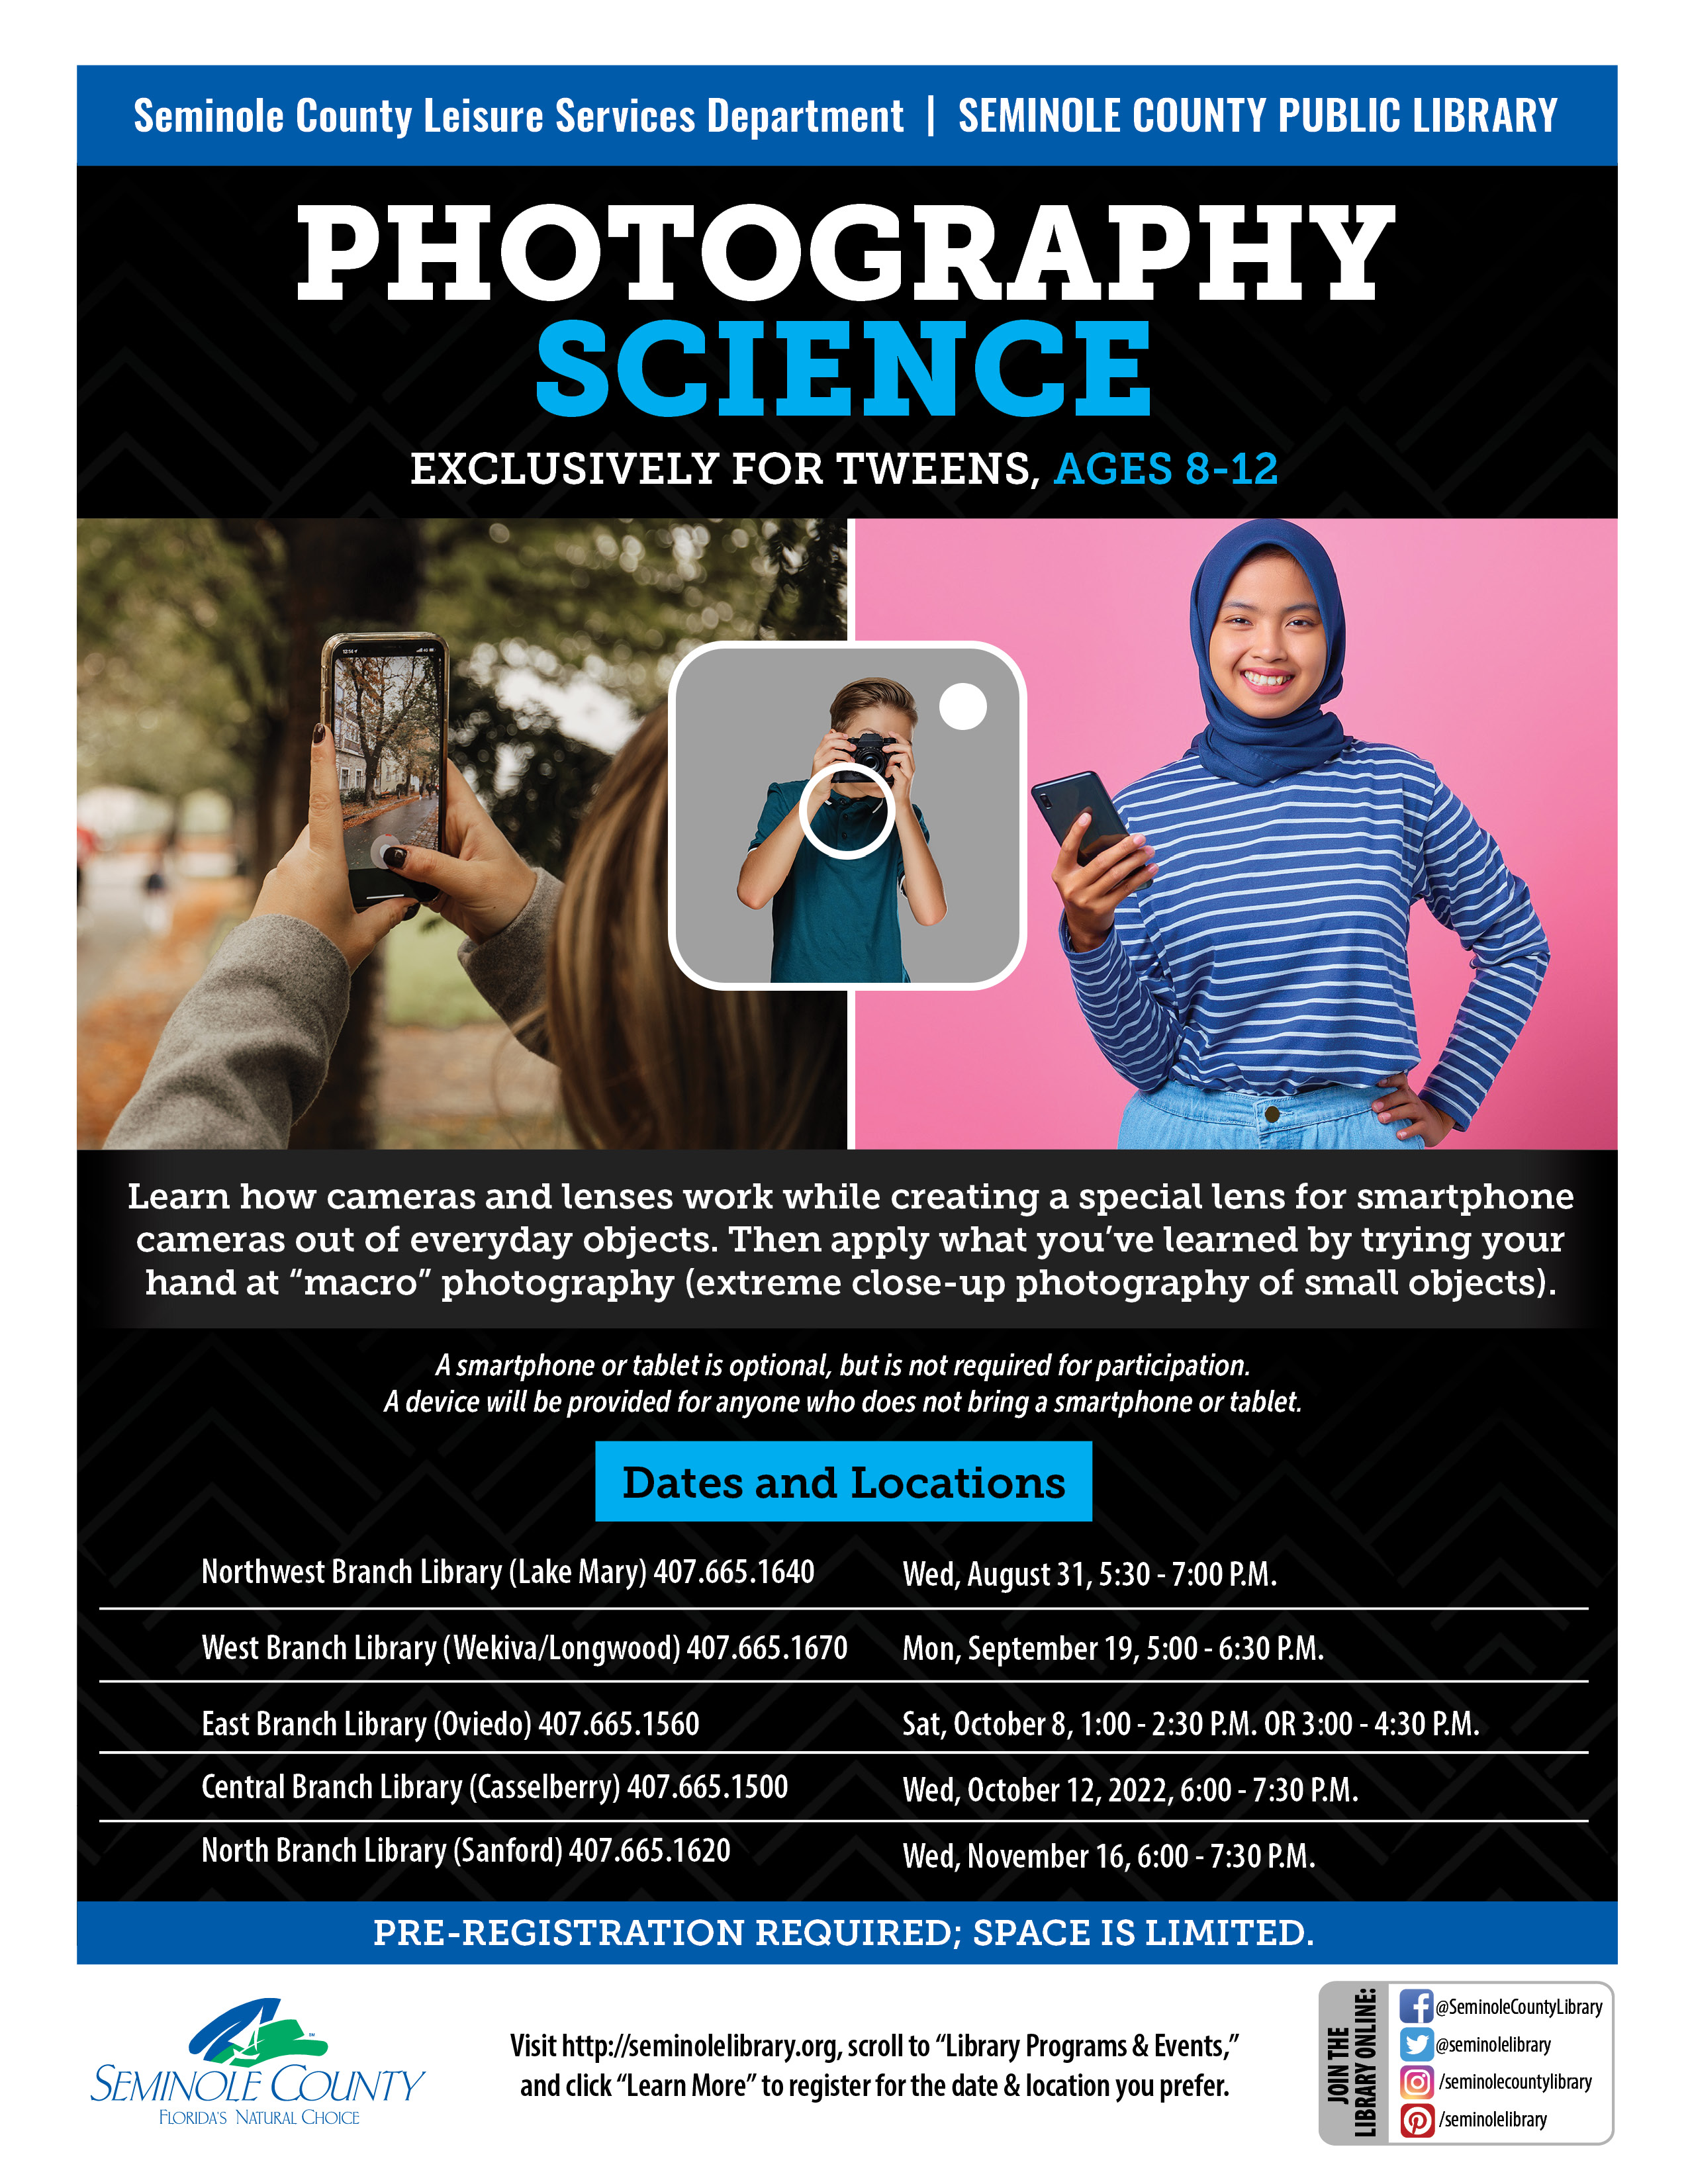 Photography Science for Tweens